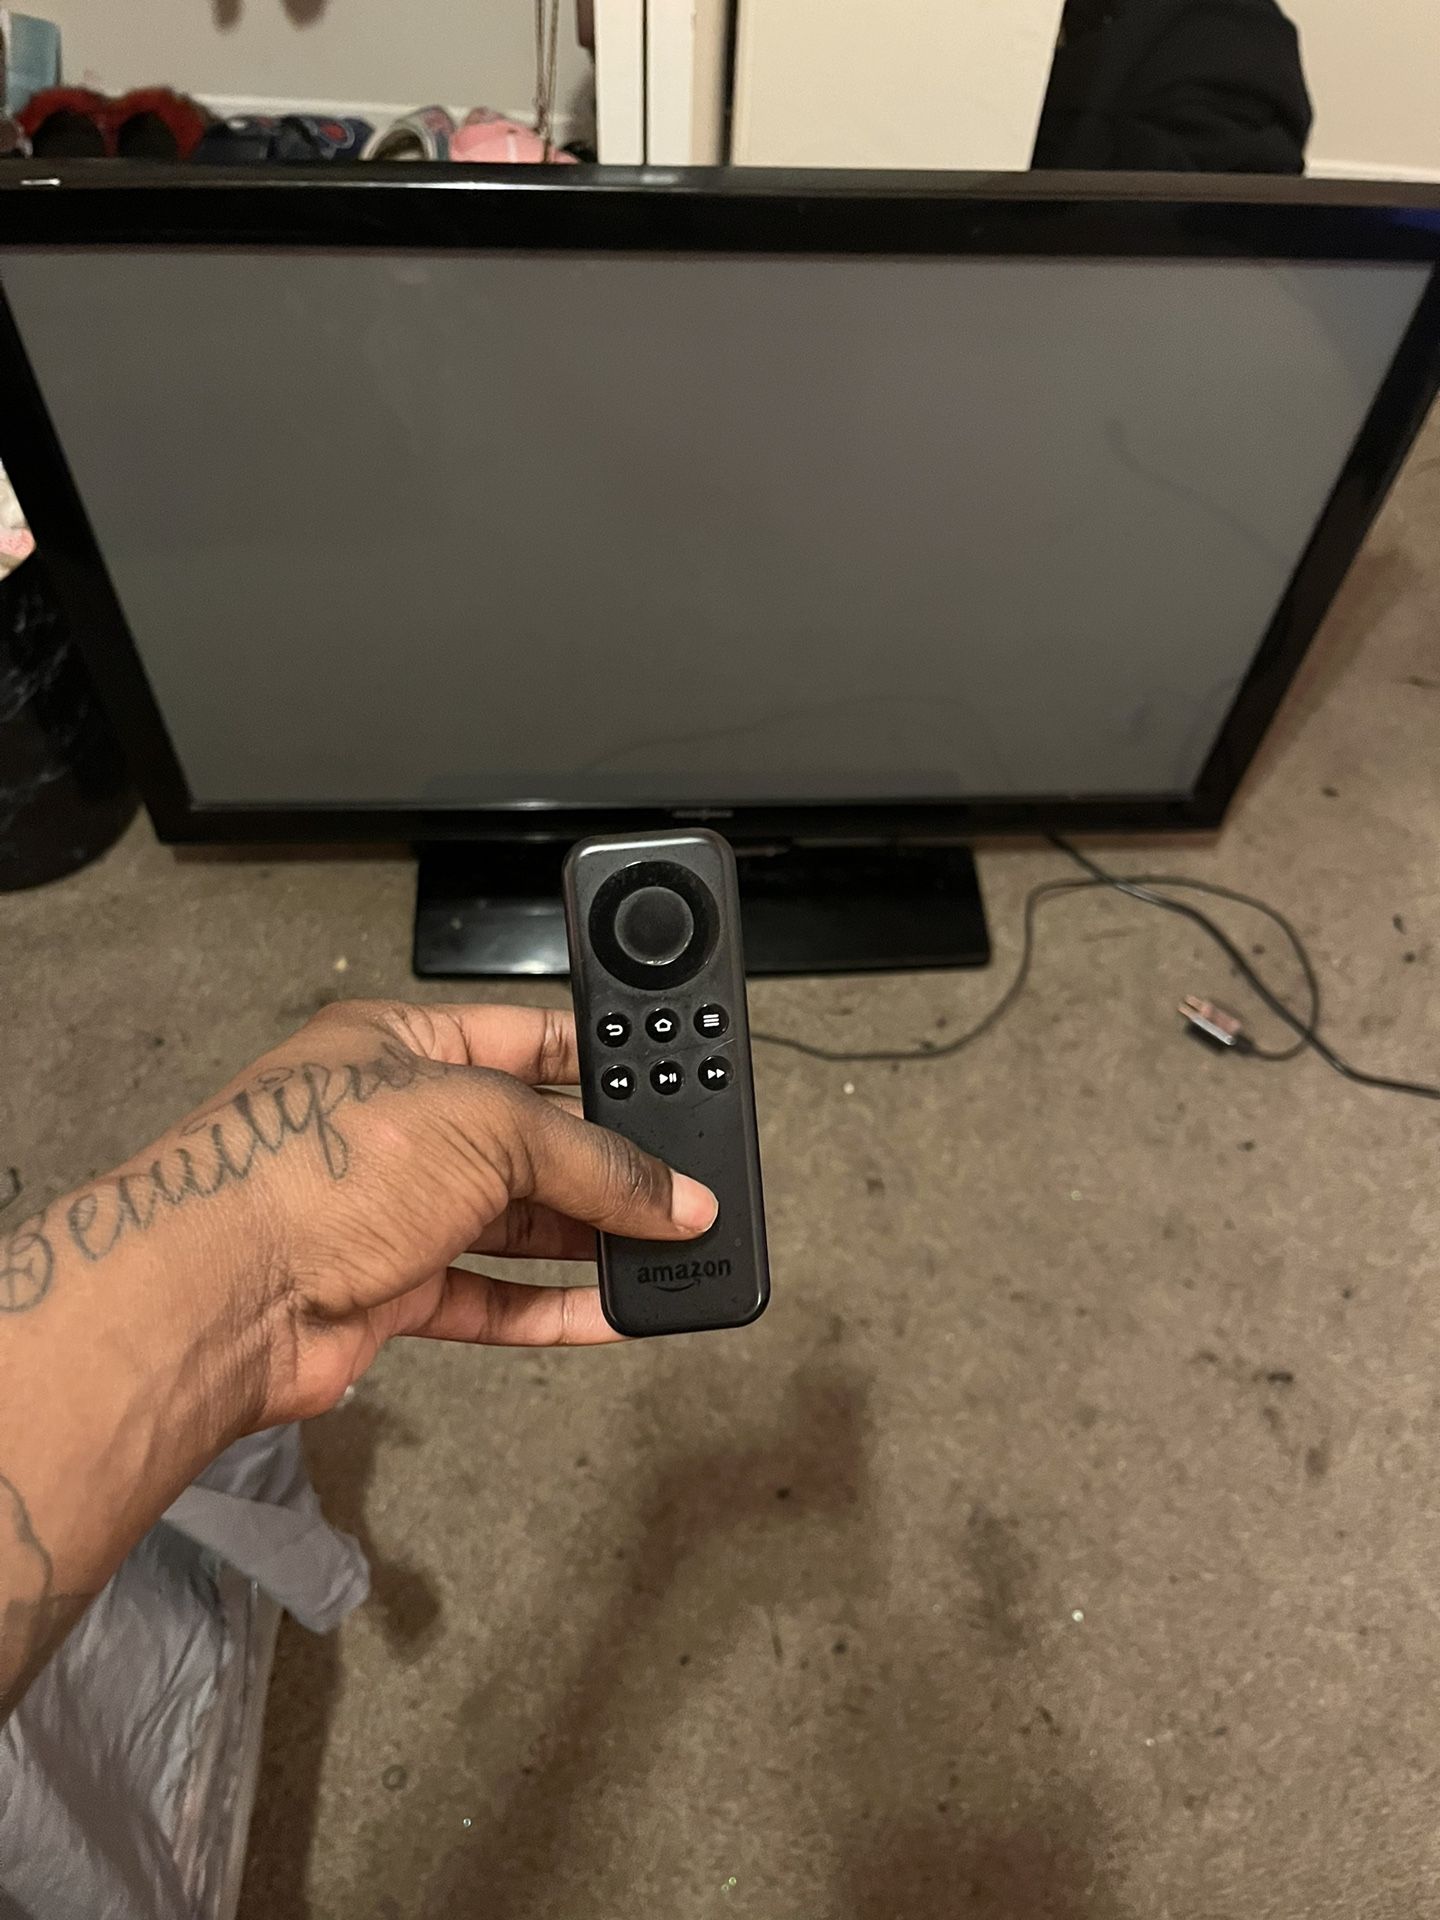 40 Inch tv With Firestick included